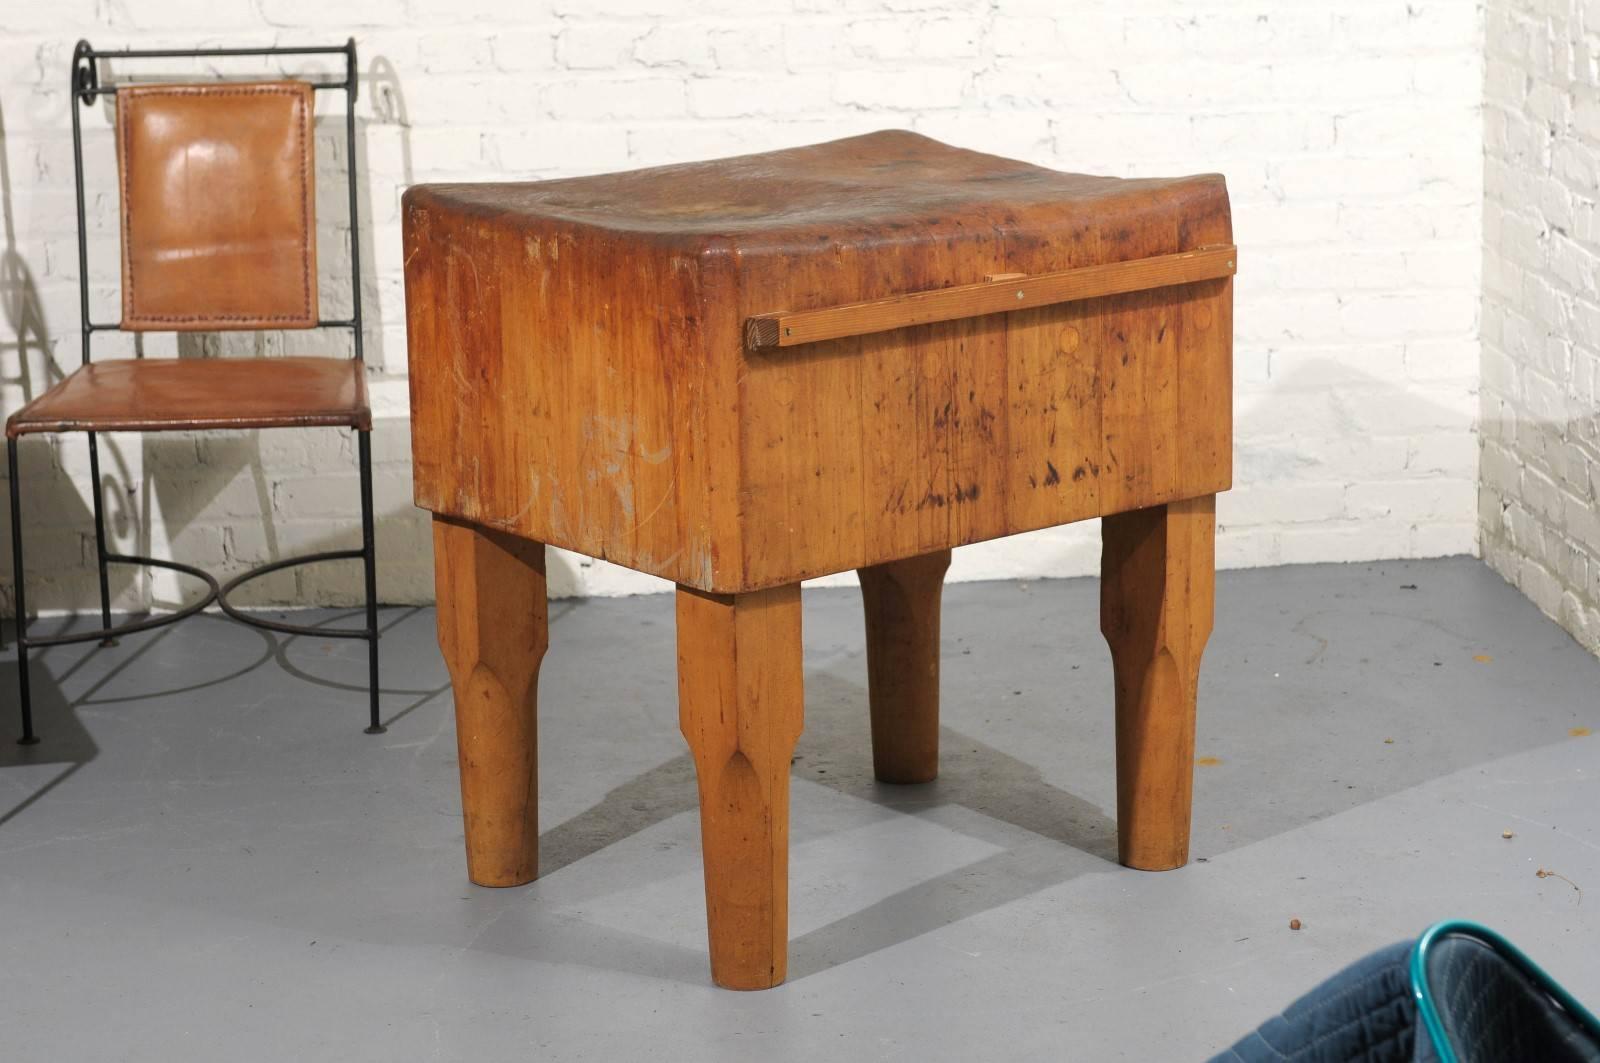 Early 20th century American butcher block table of maple with heavy wear and patina from use on the top. The table has a later added knife or towel rack on one side.